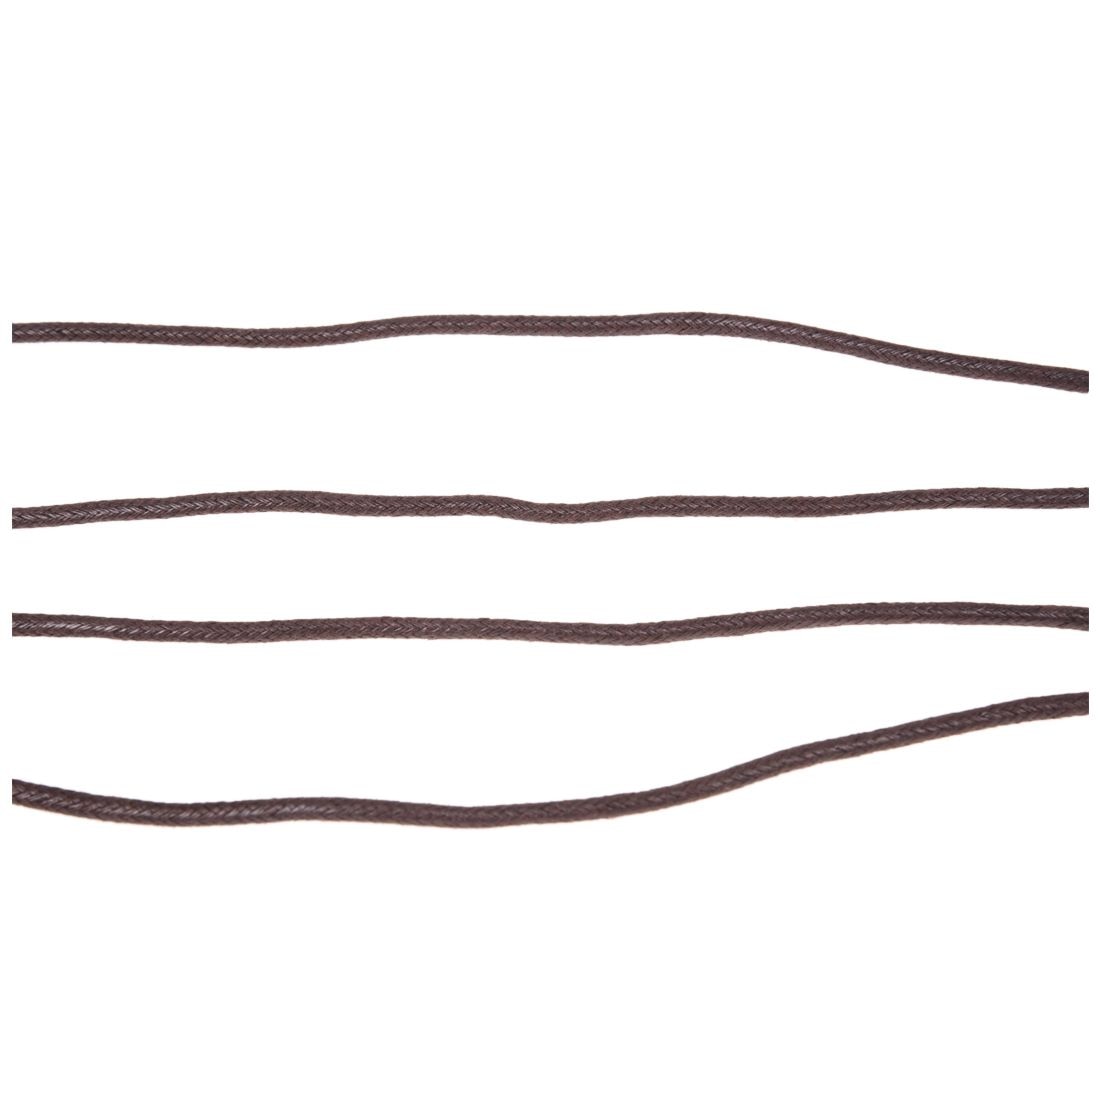 New  4 Pcs 69cm Brown Shoelace Shoestring for Leather Shoes - ebowsos